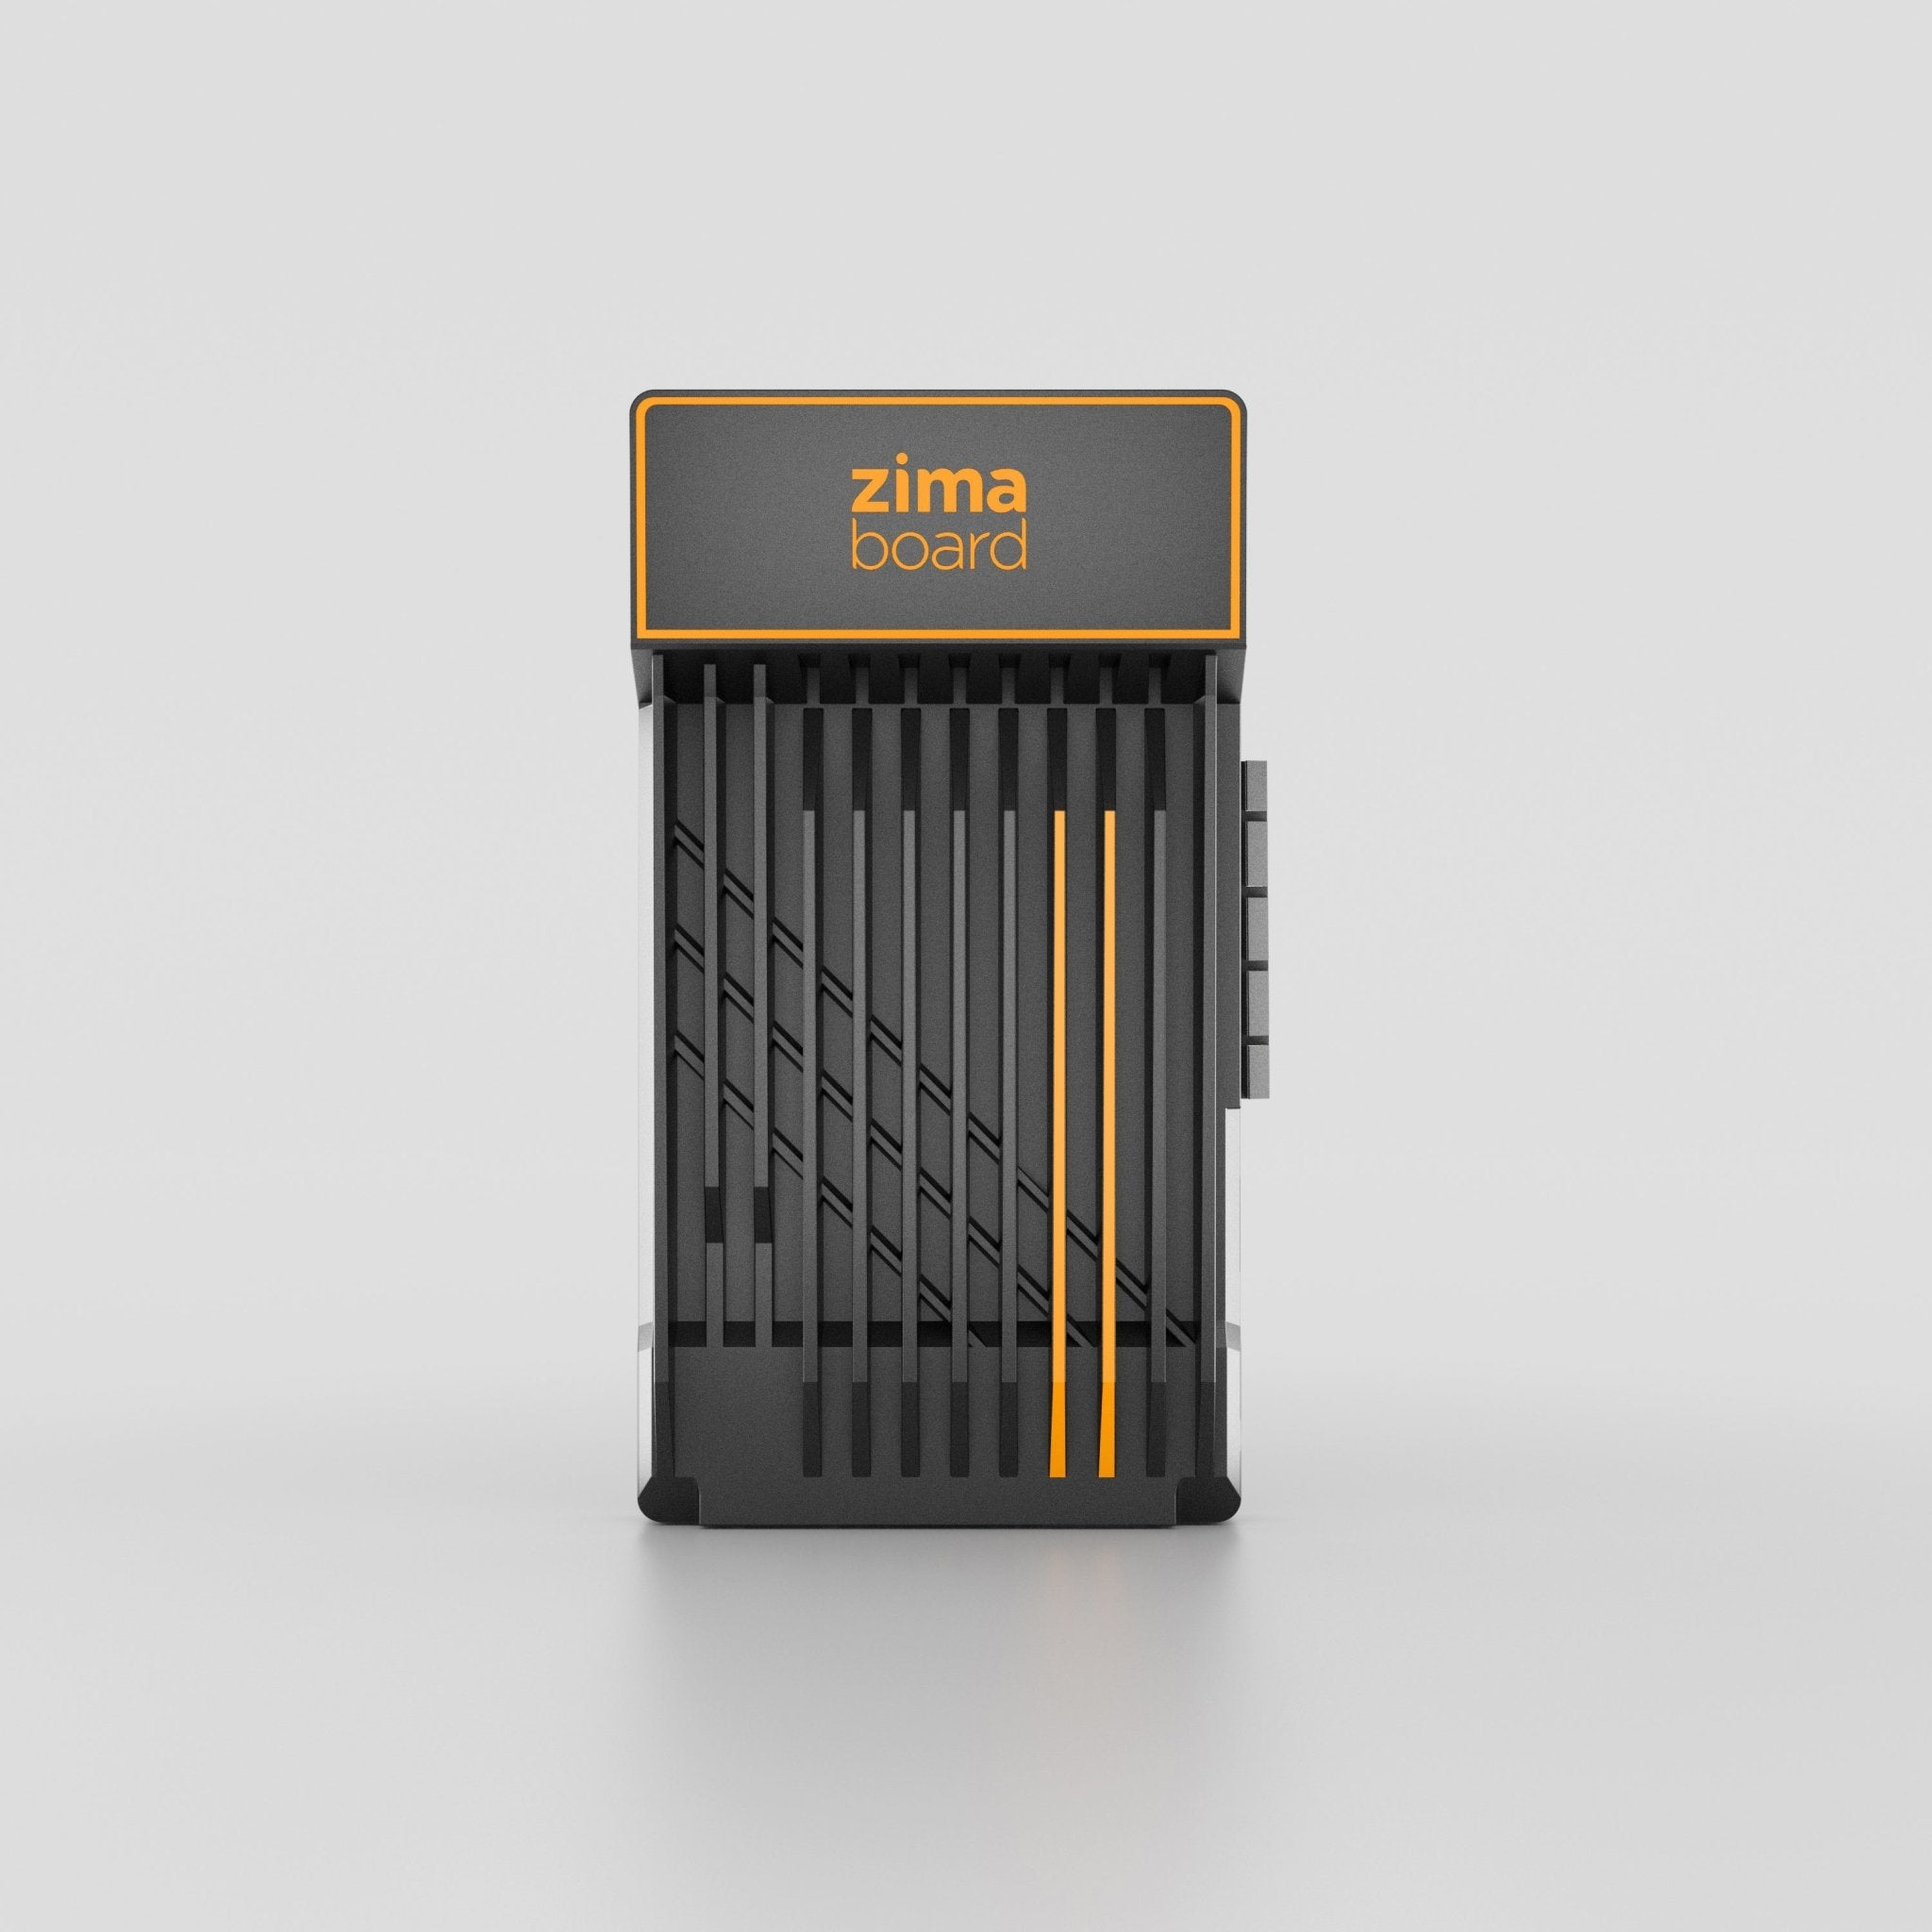  ZimaBoard 832 Single Board Server Router X86 Single Board  Computer Personal Cloud Network Attached Storage 4K Media Server Dual  Gigabit Gateway - PCIe x4 SATA 6.0 Gb/s for HDD/SSD : Electronics